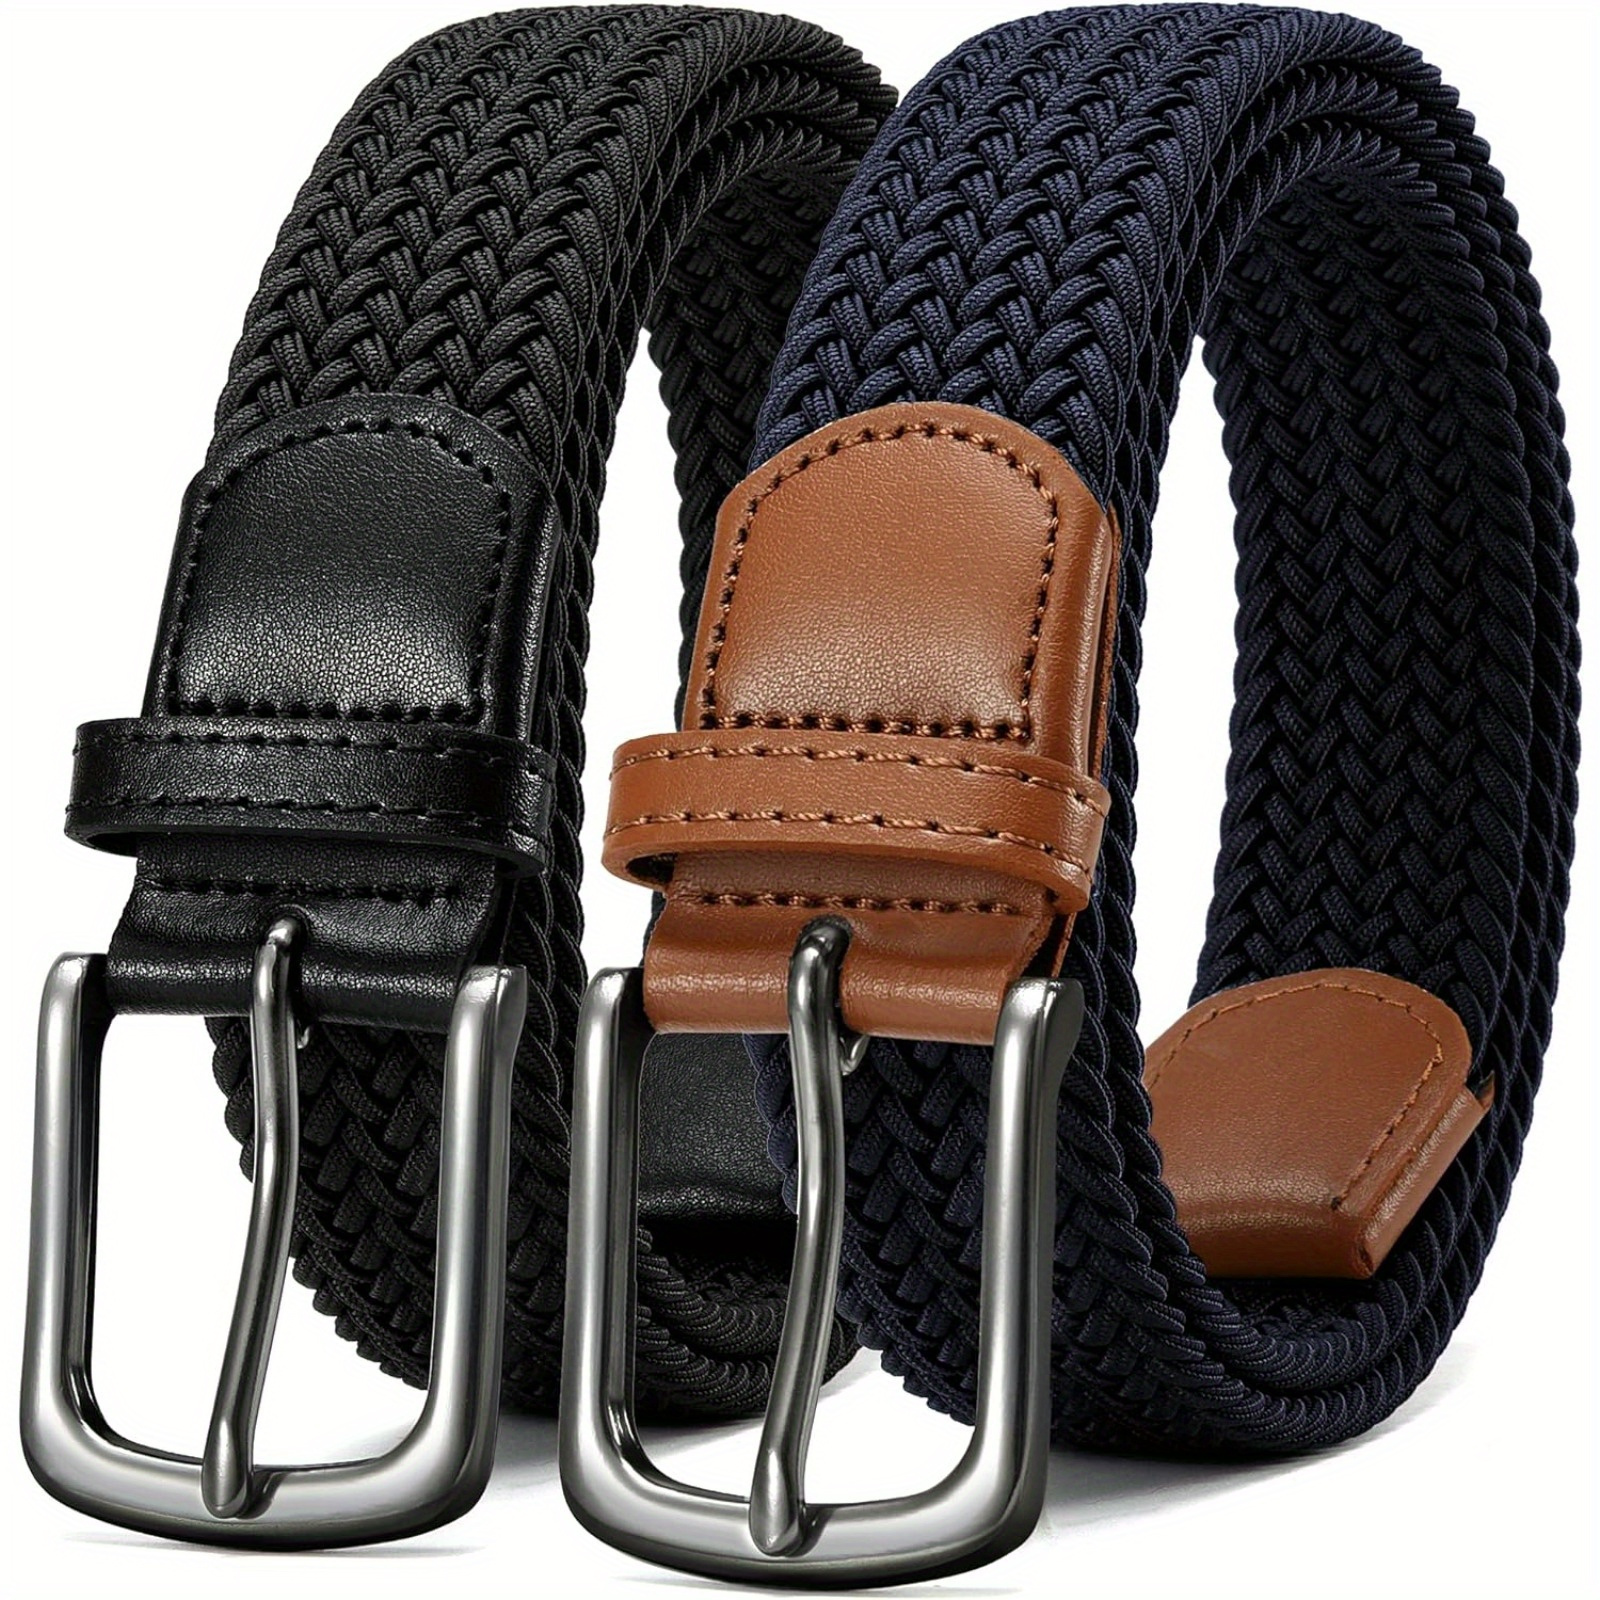 

Chaoren Elastic Braided Golf Belt For Men 2 Pack - Mens Casual Woven Stretch Belts 1 3/8" - For Golf Pant Casual Jeans